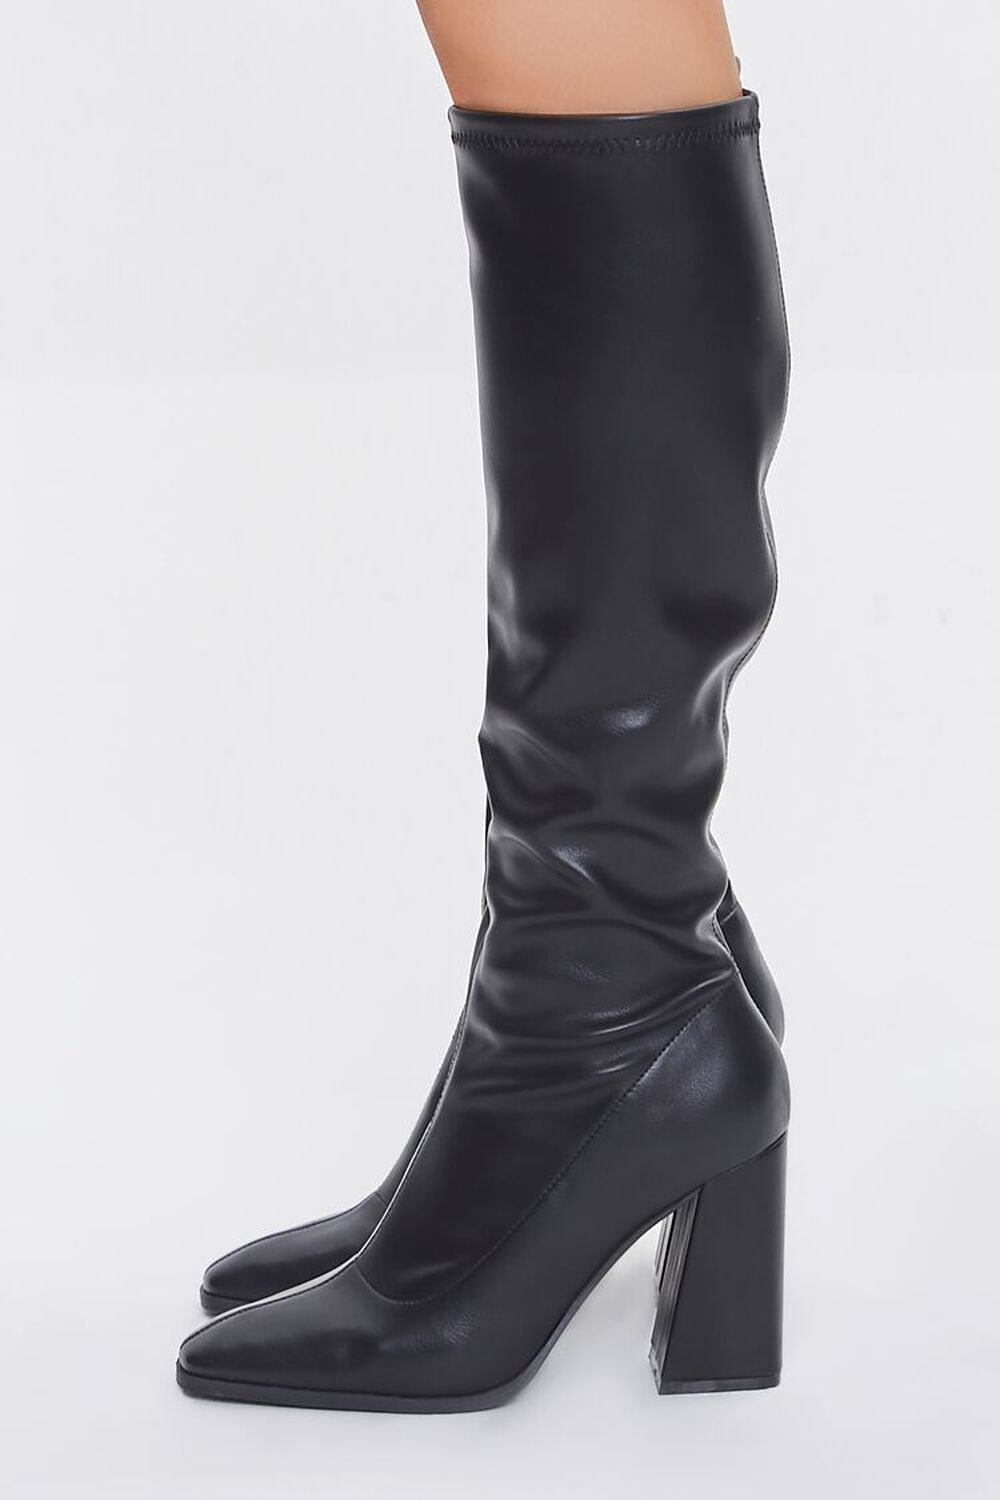 Faux Leather Calf-High Boots